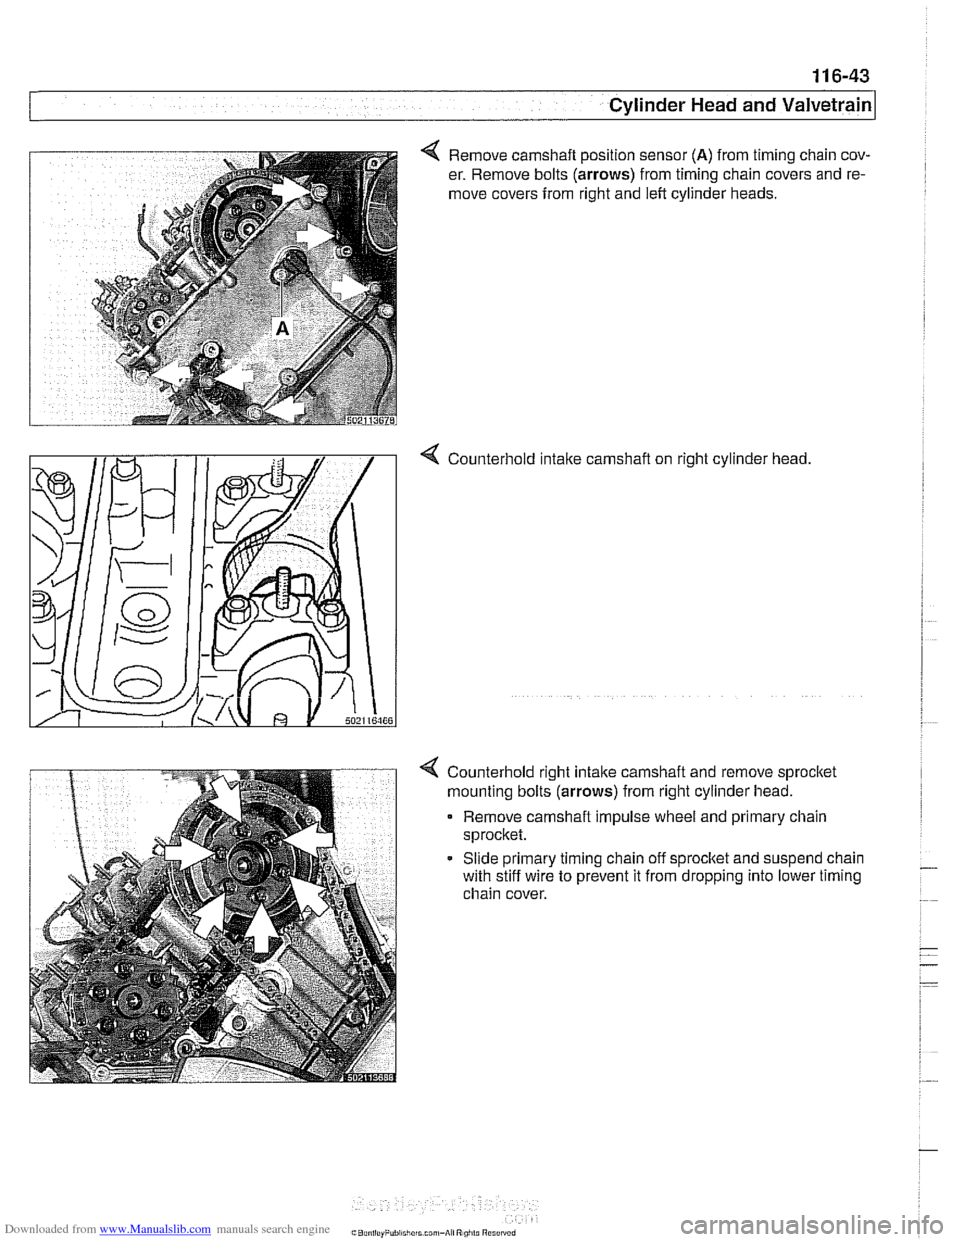 BMW 525i 2001 E39 Owners Manual Downloaded from www.Manualslib.com manuals search engine 
Cylinder Head and valvetrain1 
4 Remove camshaft position sensor (A) from timing chain cov- 
er.  Remove bolts 
(arrows) from timing chain cov